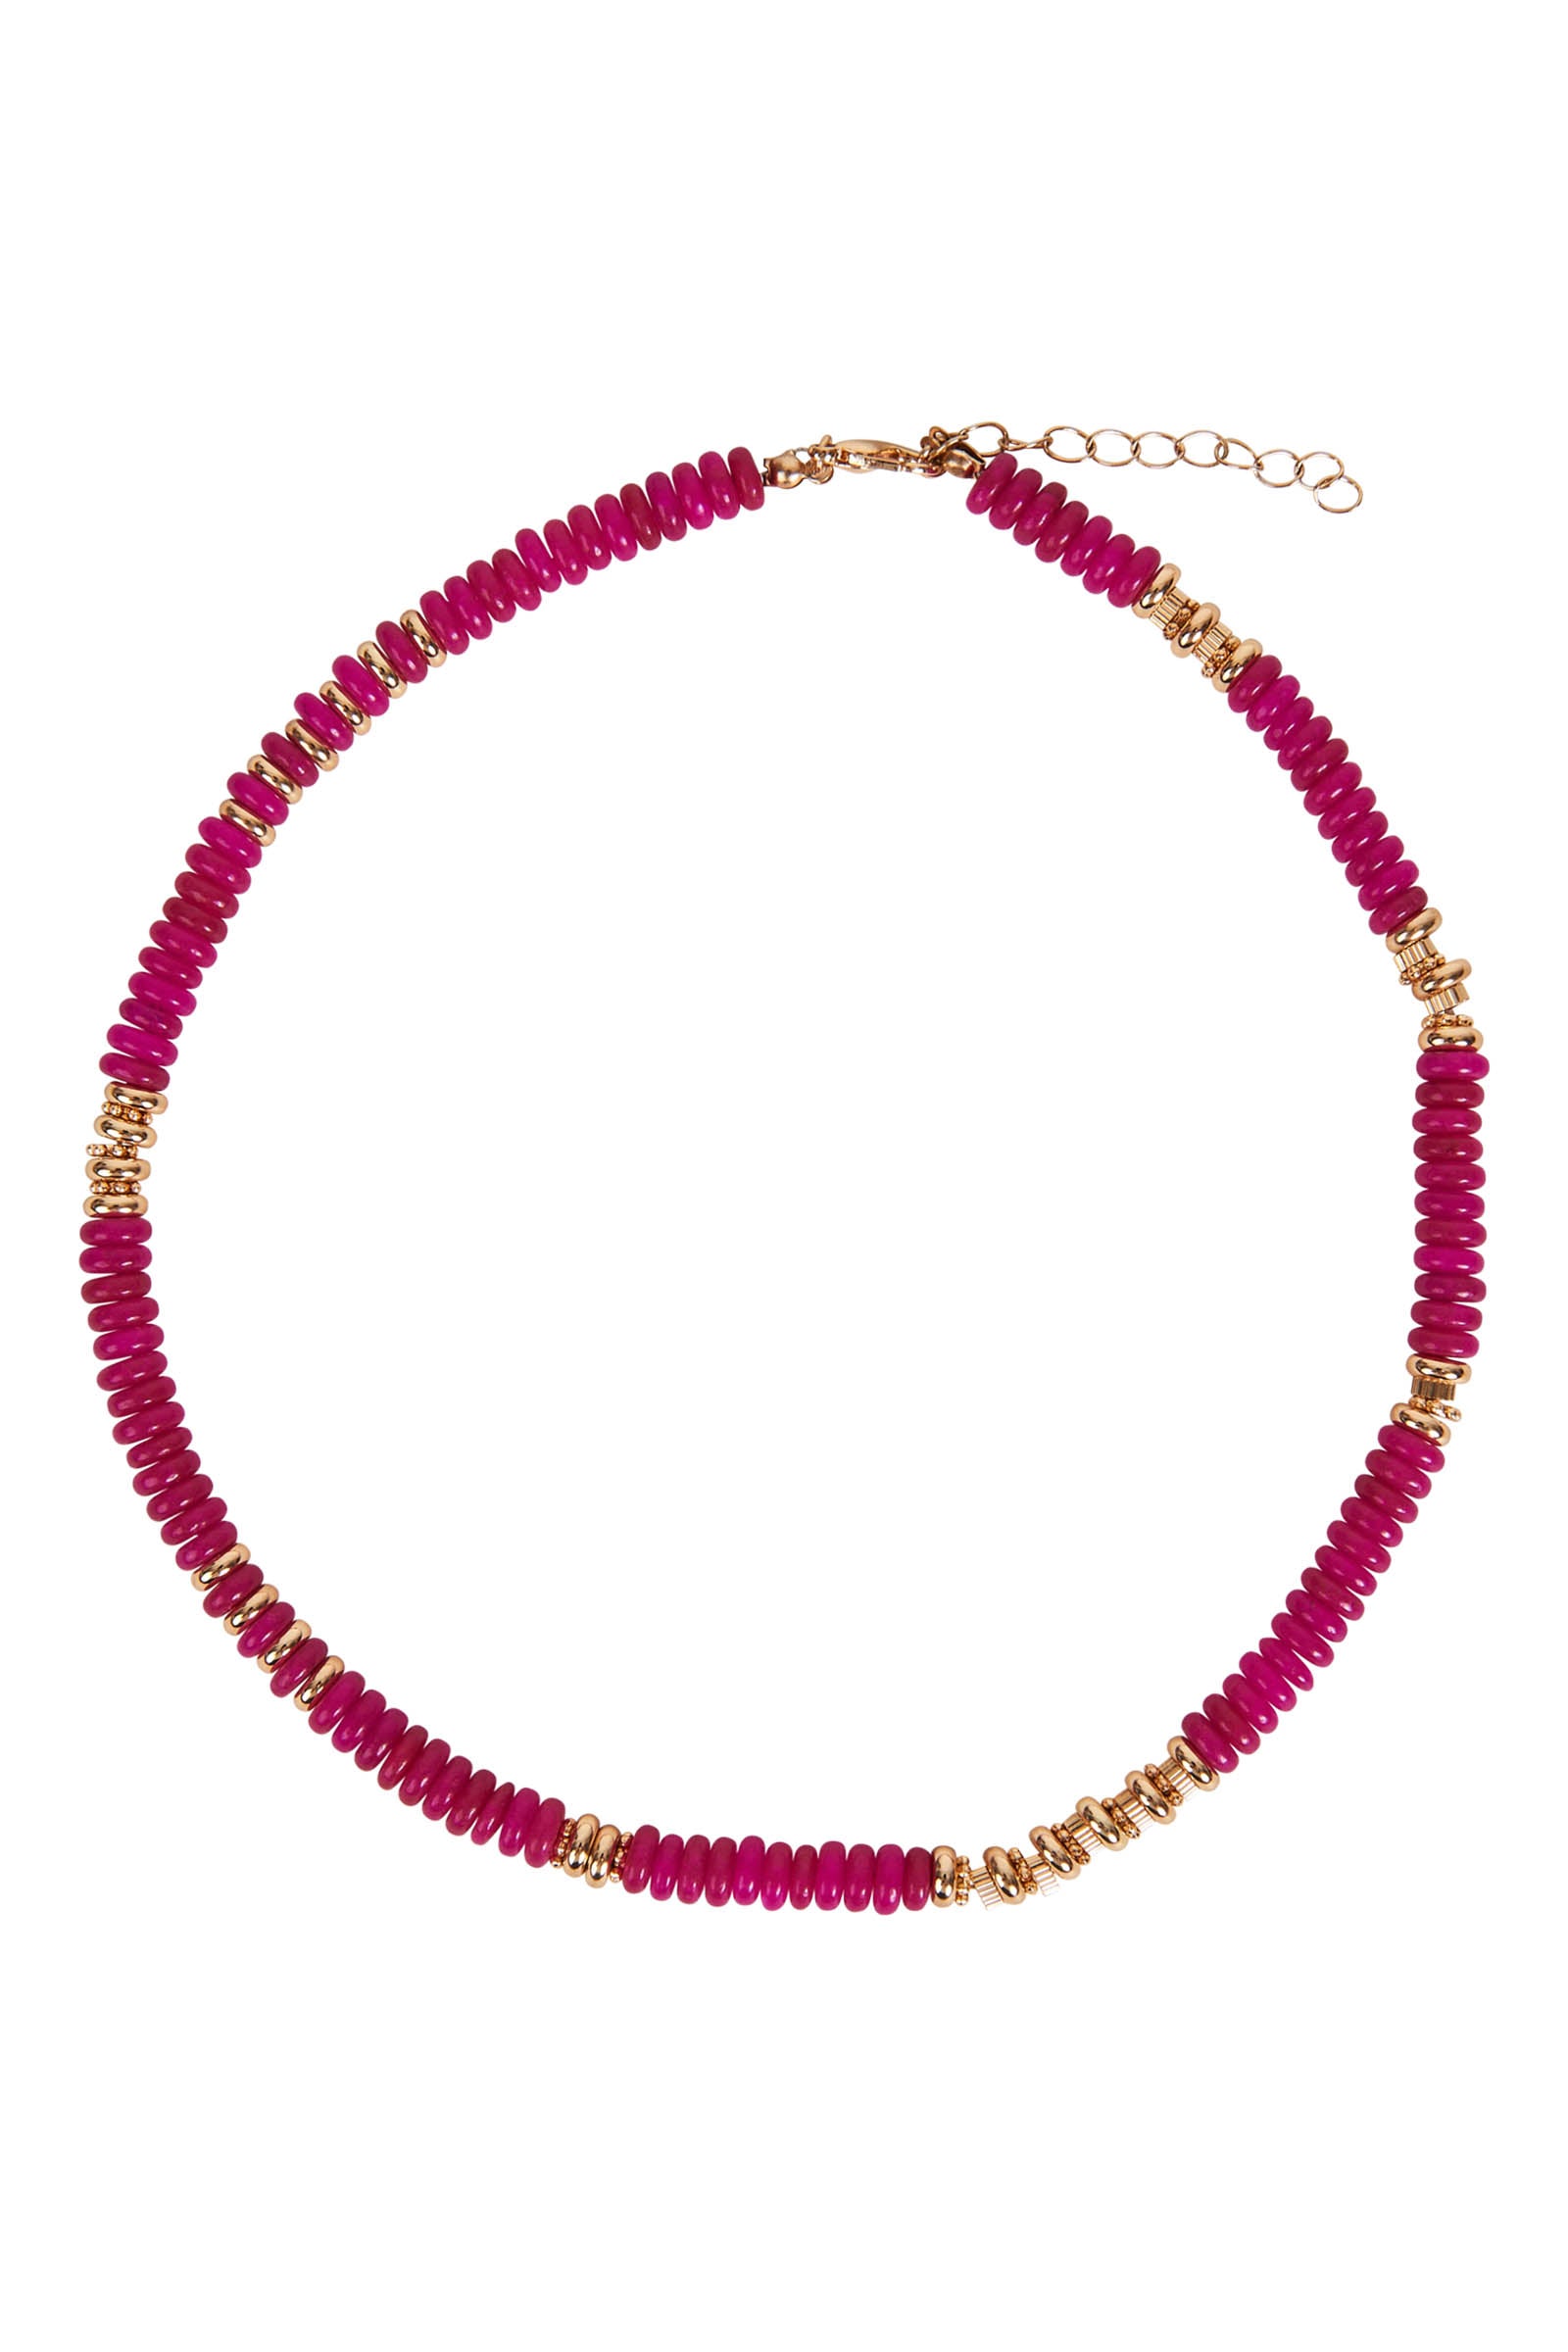 Elan Necklace - Candy - eb&ive Necklace